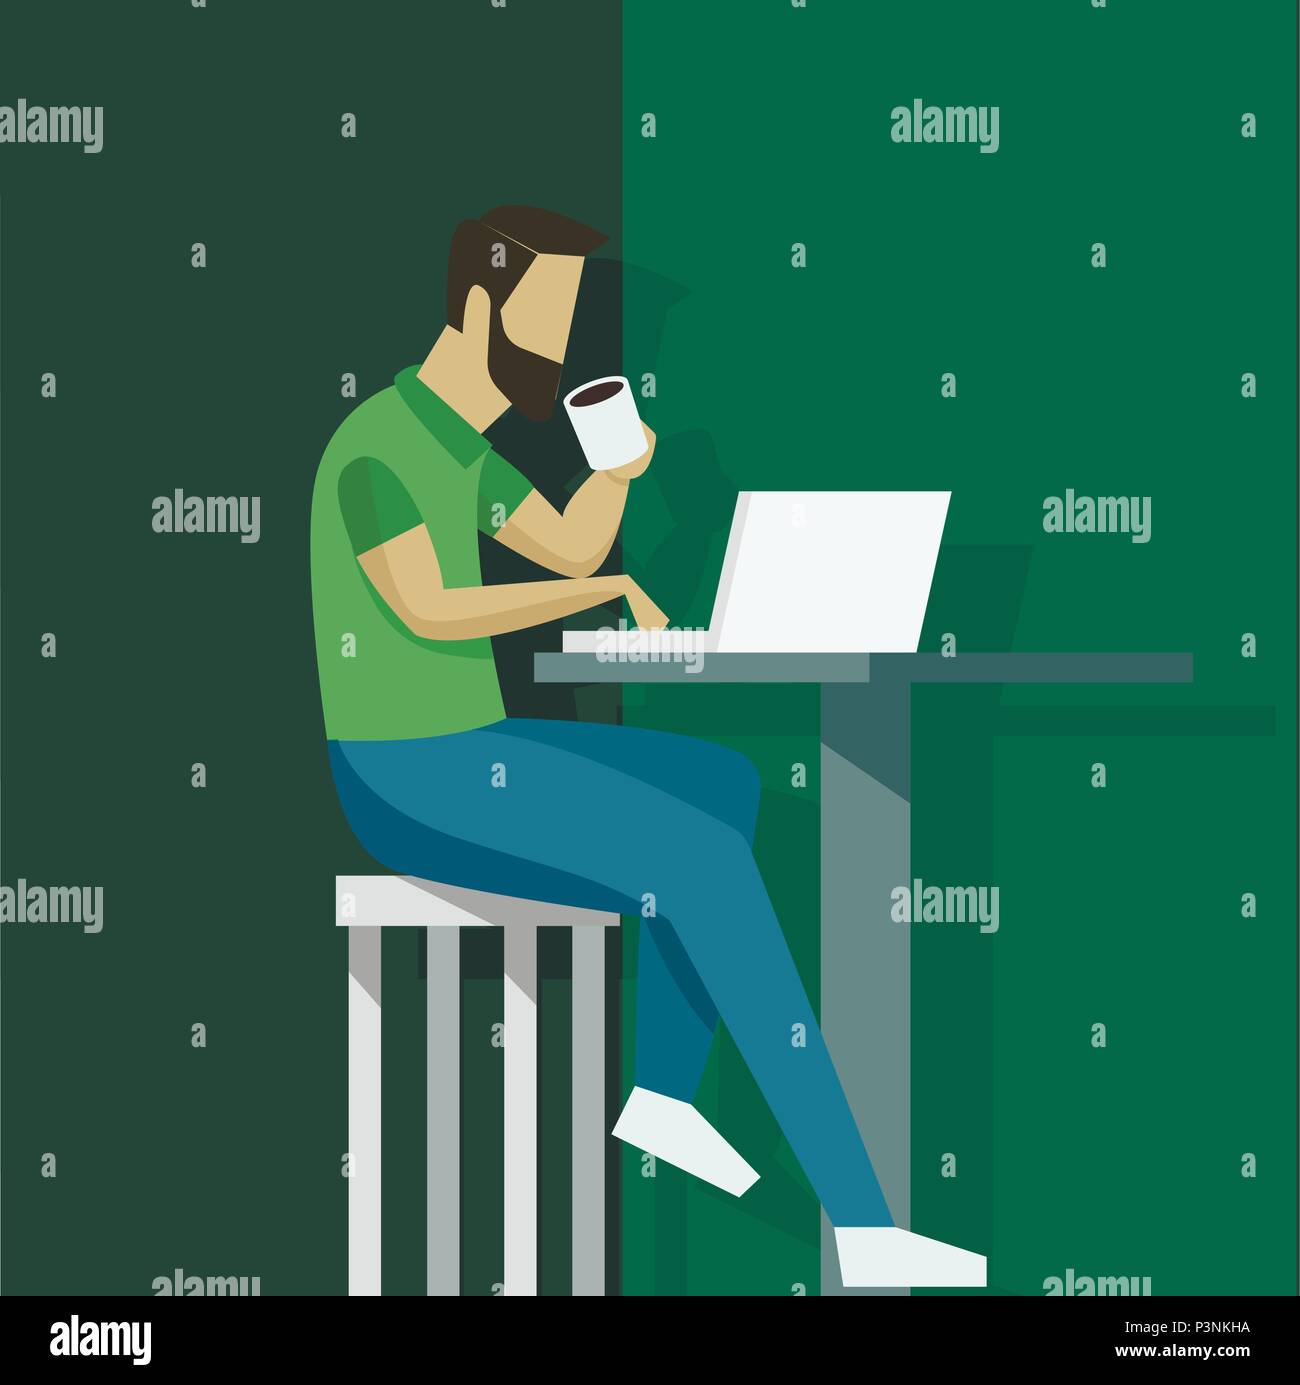 Vector illustration in flat style with business man character - guy sitting at the desk with laptop - start up, freelance and outsource work concept Stock Vector